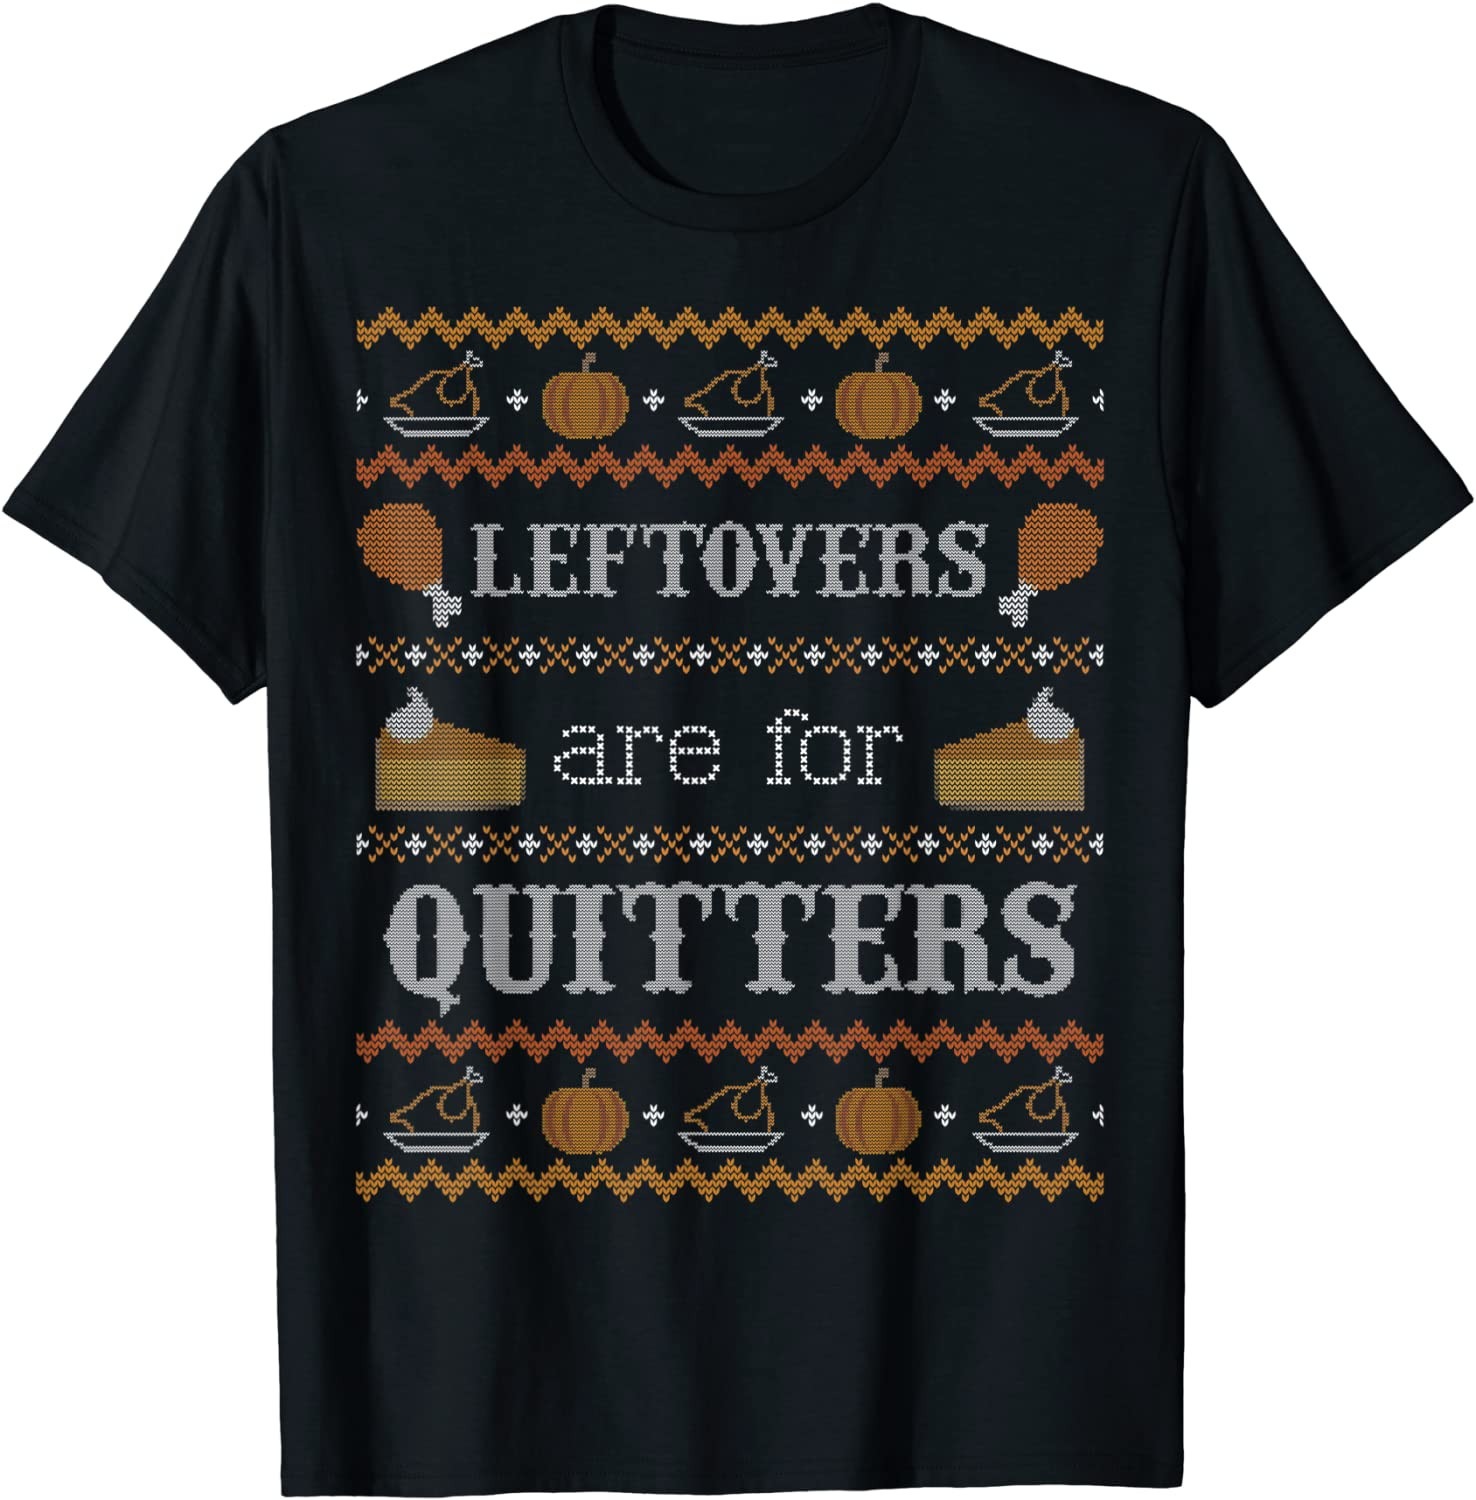 Funny Ugly Thanksgiving   T-Shirt